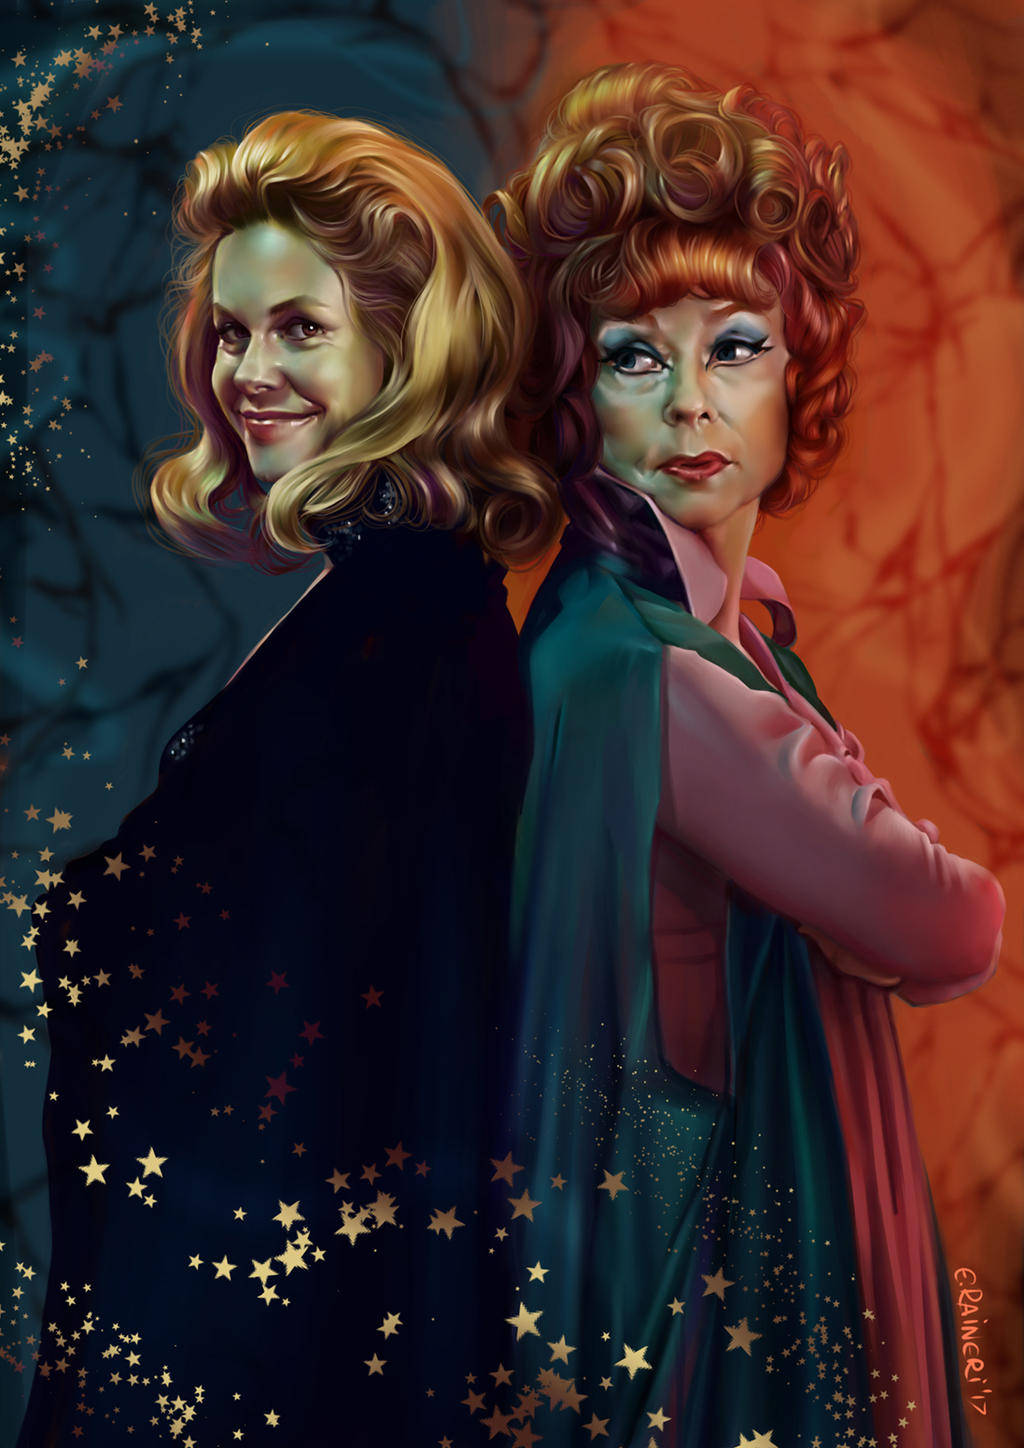 Bewitched Samantha and Endora Wallpaper